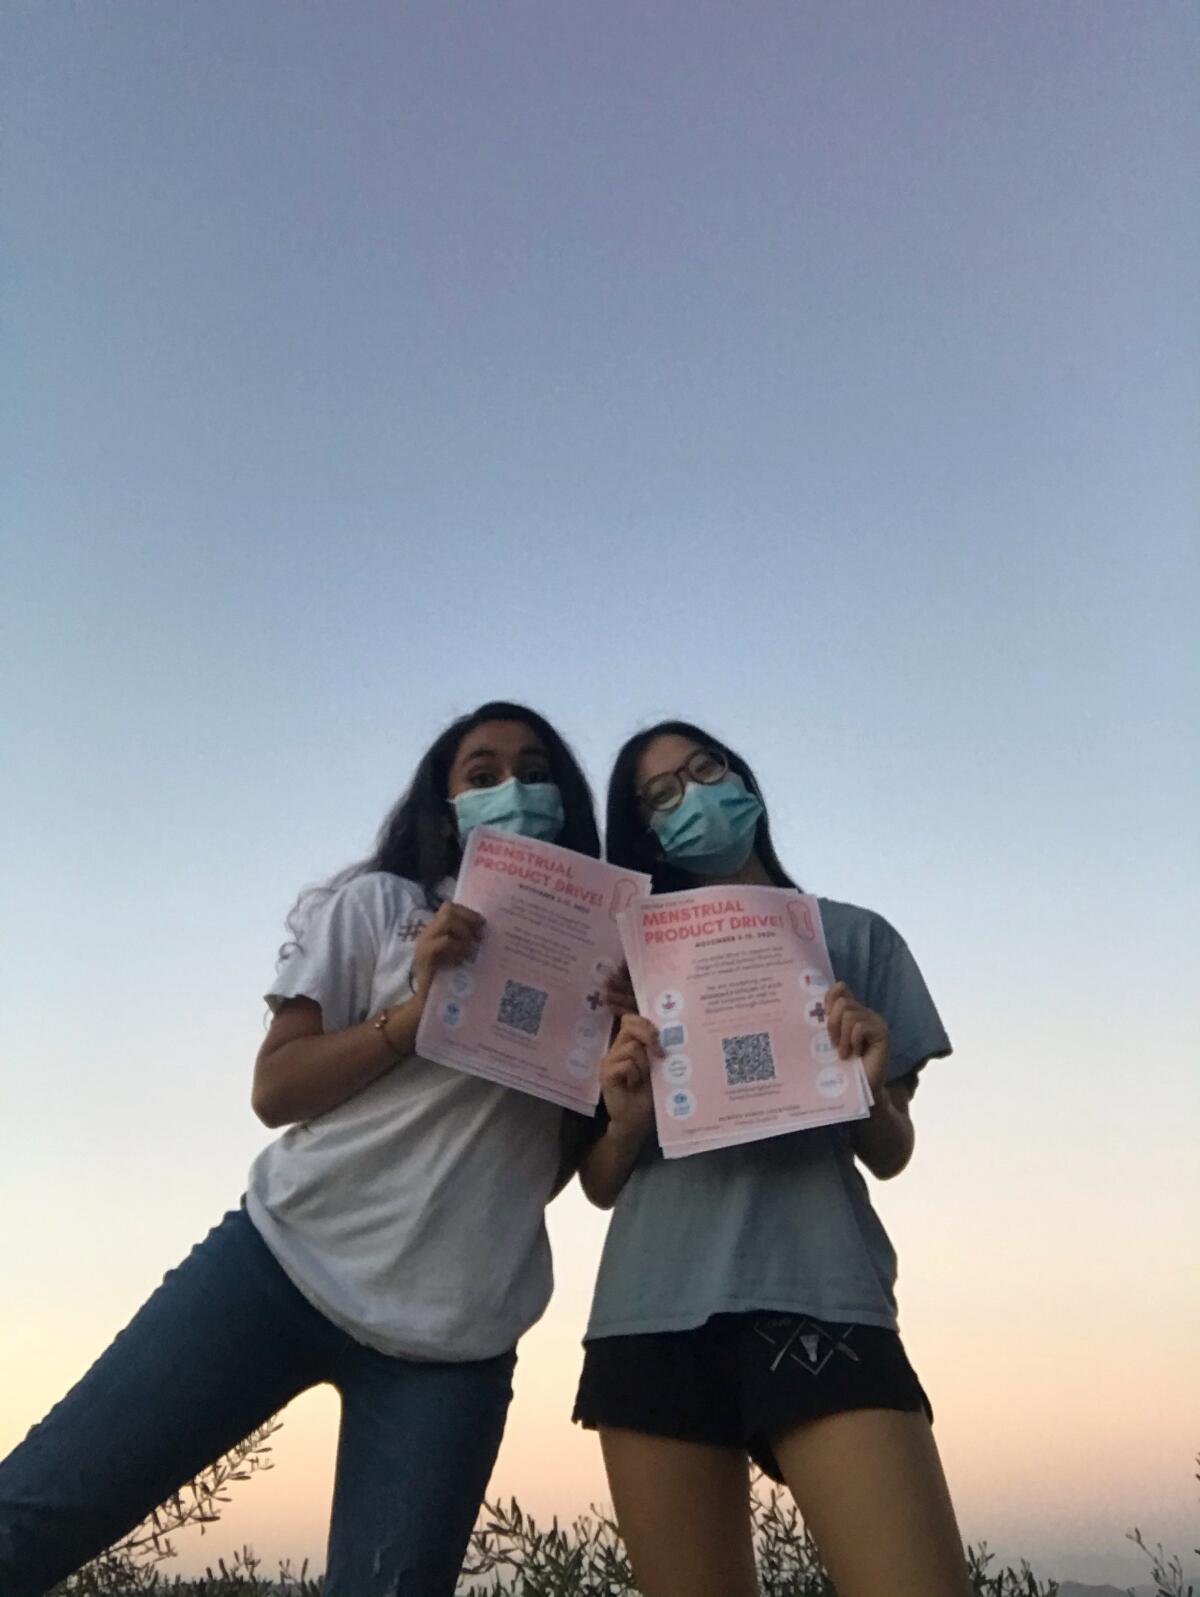 Scripps Ranch High School students Madhavi Akella and Kylie Bach, both 16, started the school’s Covers for Lives club.